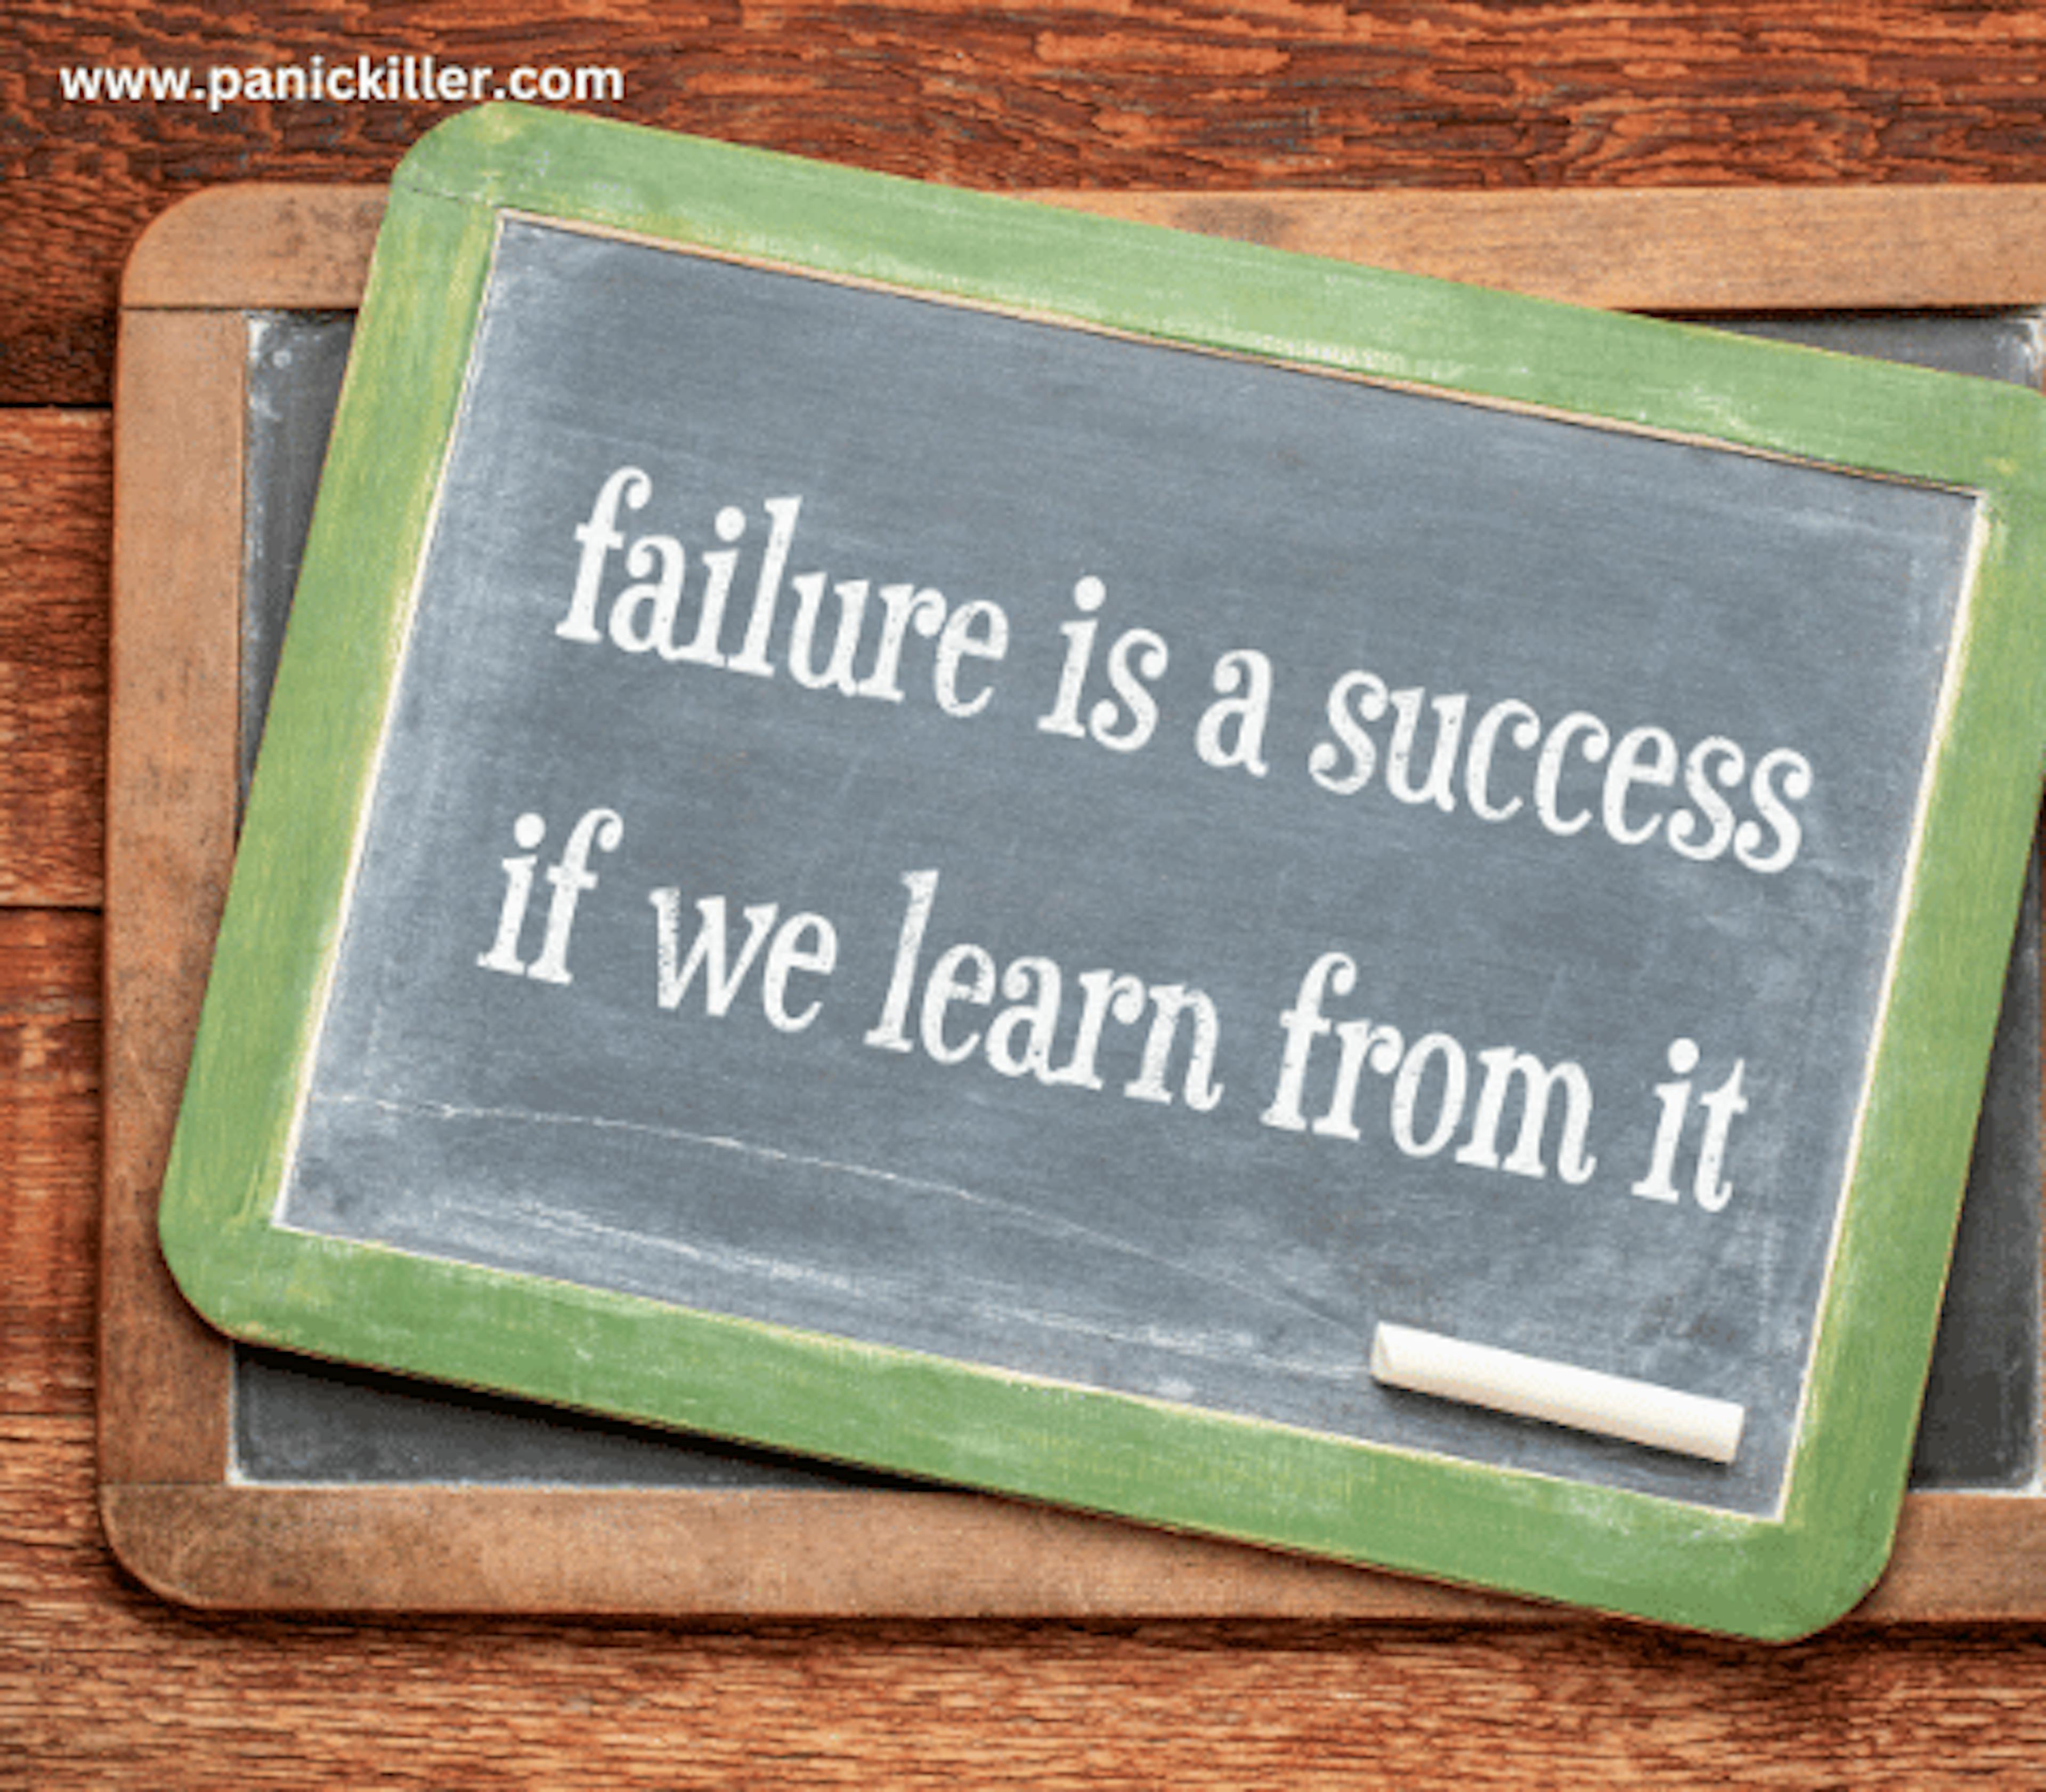 failure is a success if we learn from it